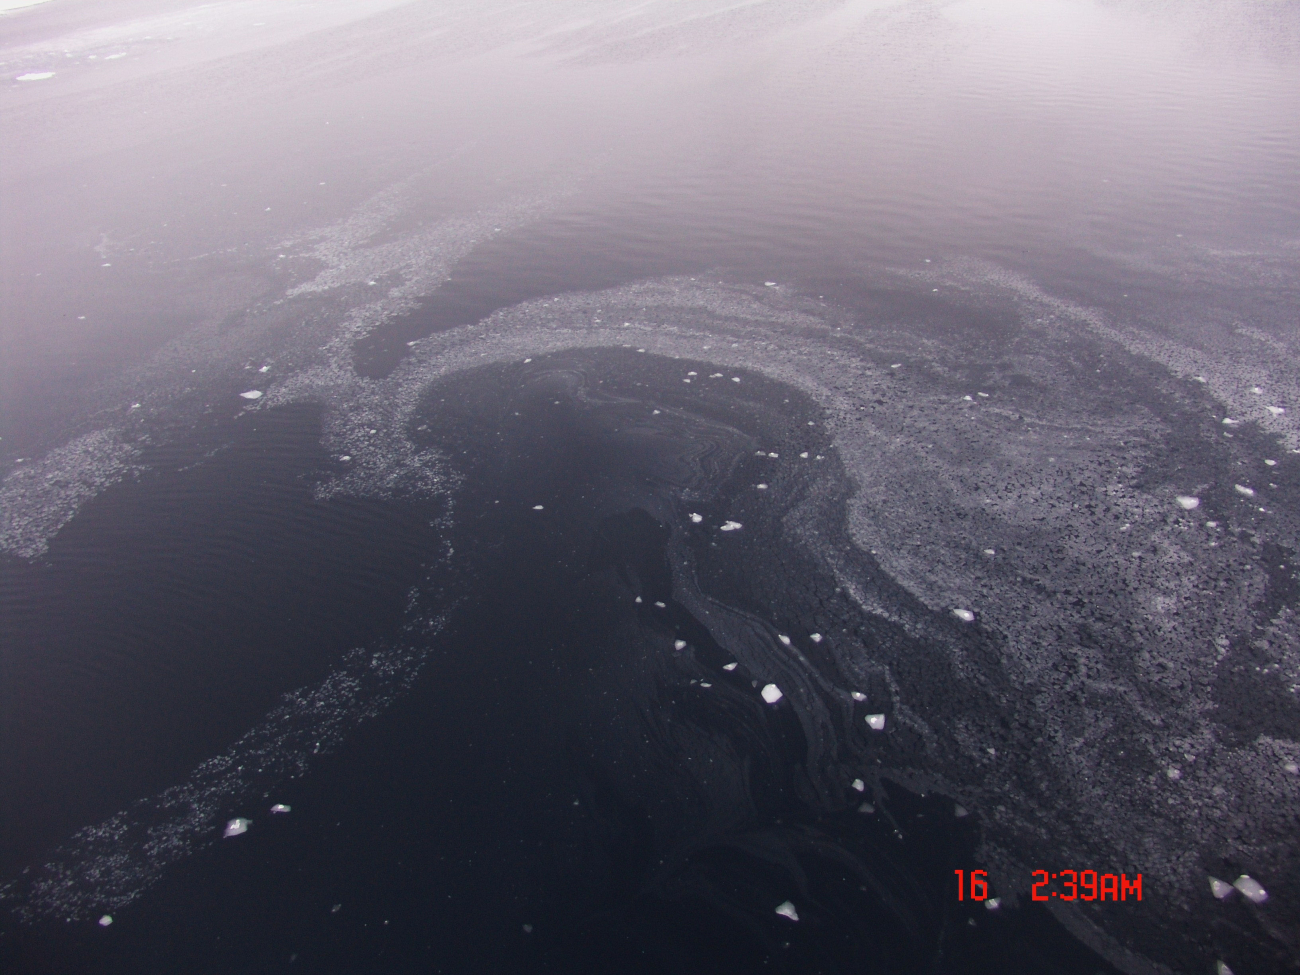 Swirls of nilas forming on open water